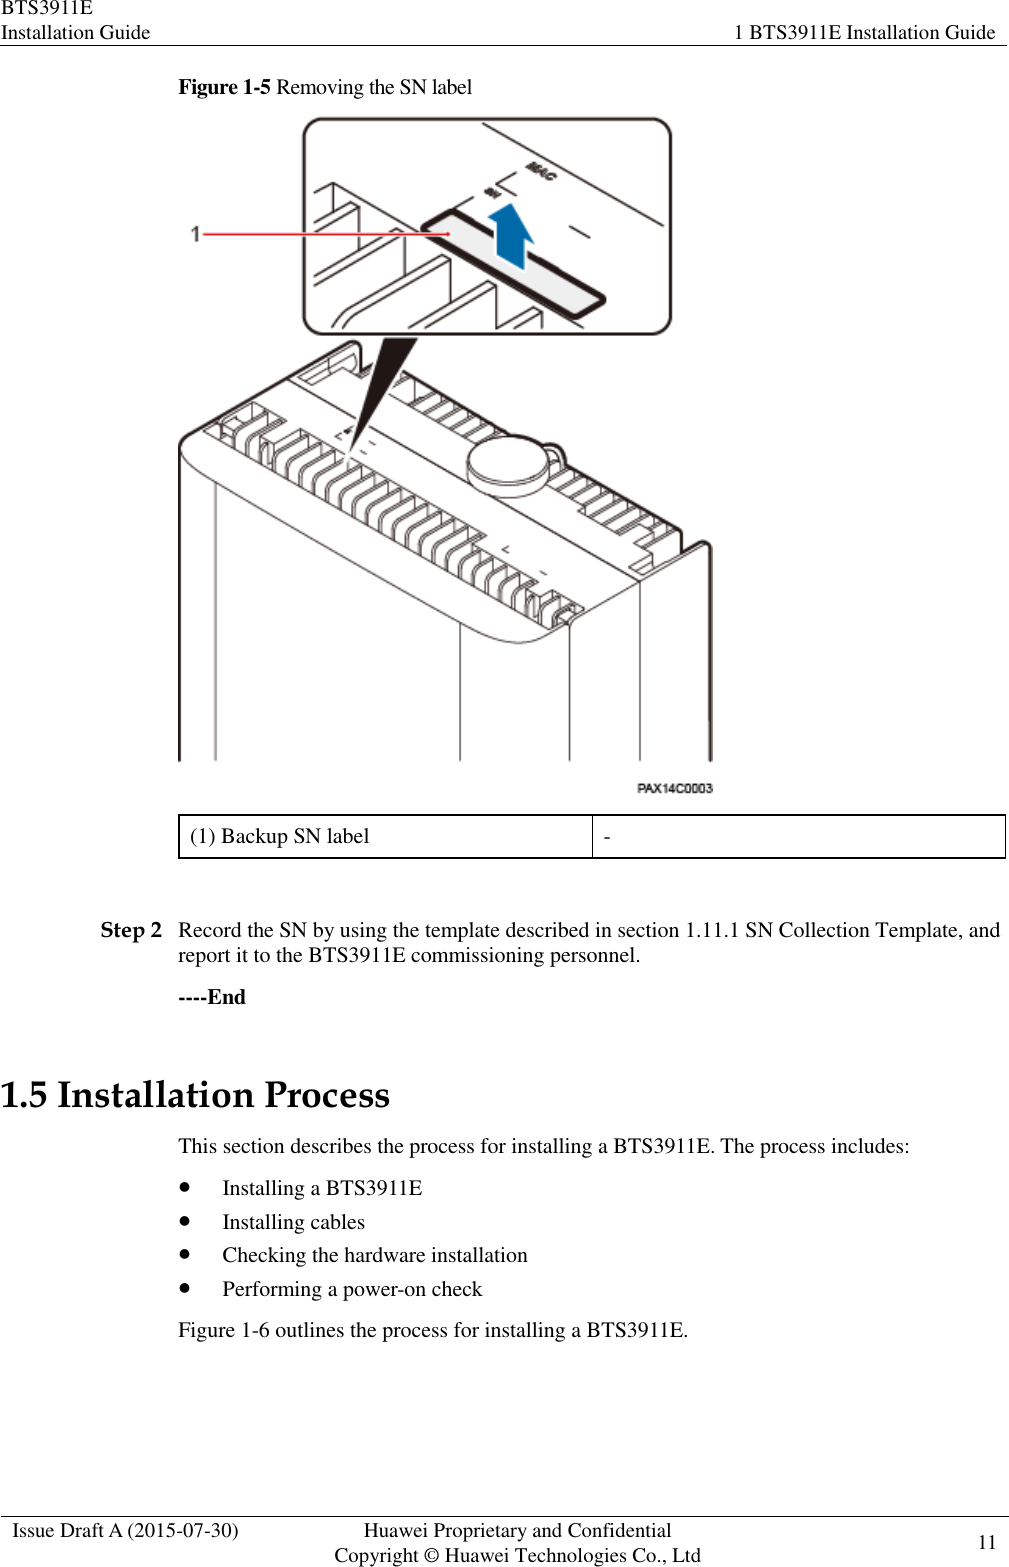 BTS3911E Installation Guide 1 BTS3911E Installation Guide  Issue Draft A (2015-07-30) Huawei Proprietary and Confidential           Copyright © Huawei Technologies Co., Ltd 11    Figure 1-5 Removing the SN label  (1) Backup SN label -  Step 2 Record the SN by using the template described in section 1.11.1 SN Collection Template, and report it to the BTS3911E commissioning personnel. ----End 1.5 Installation Process This section describes the process for installing a BTS3911E. The process includes:  Installing a BTS3911E  Installing cables  Checking the hardware installation  Performing a power-on check Figure 1-6 outlines the process for installing a BTS3911E. 